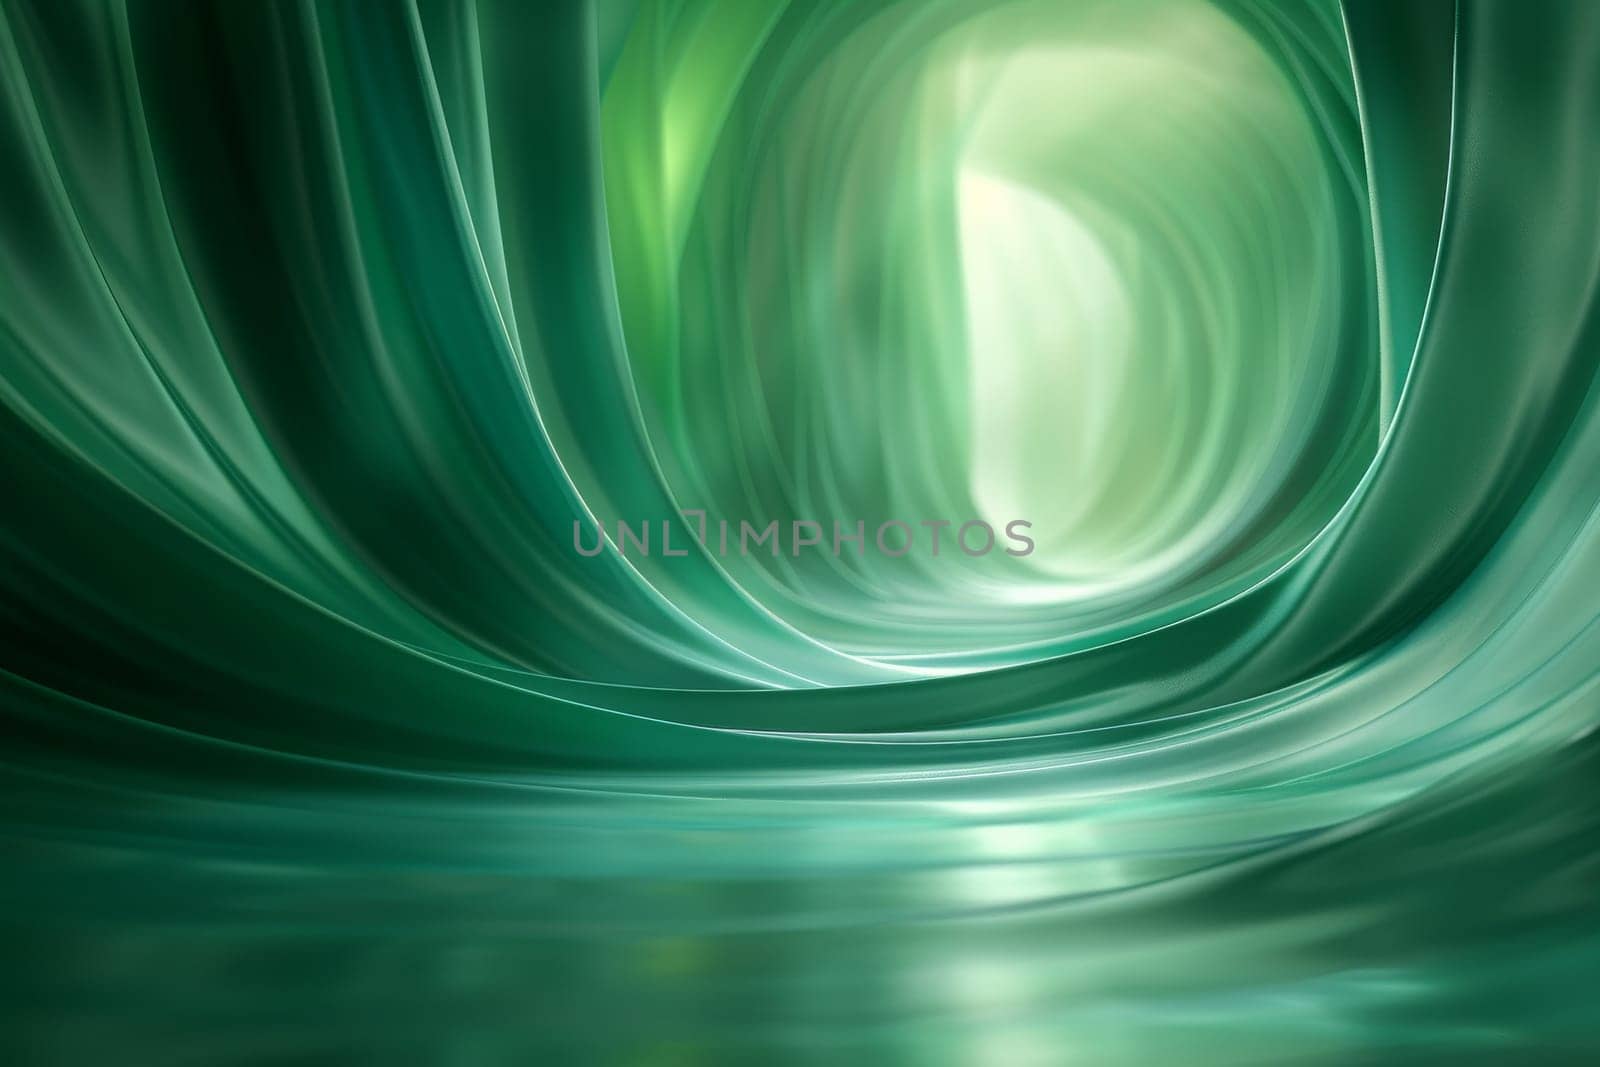 A green tunnel with a light shining through it. The tunnel is long and narrow, and the light is coming from the top. The tunnel is surrounded by water, which adds to the sense of depth and mystery